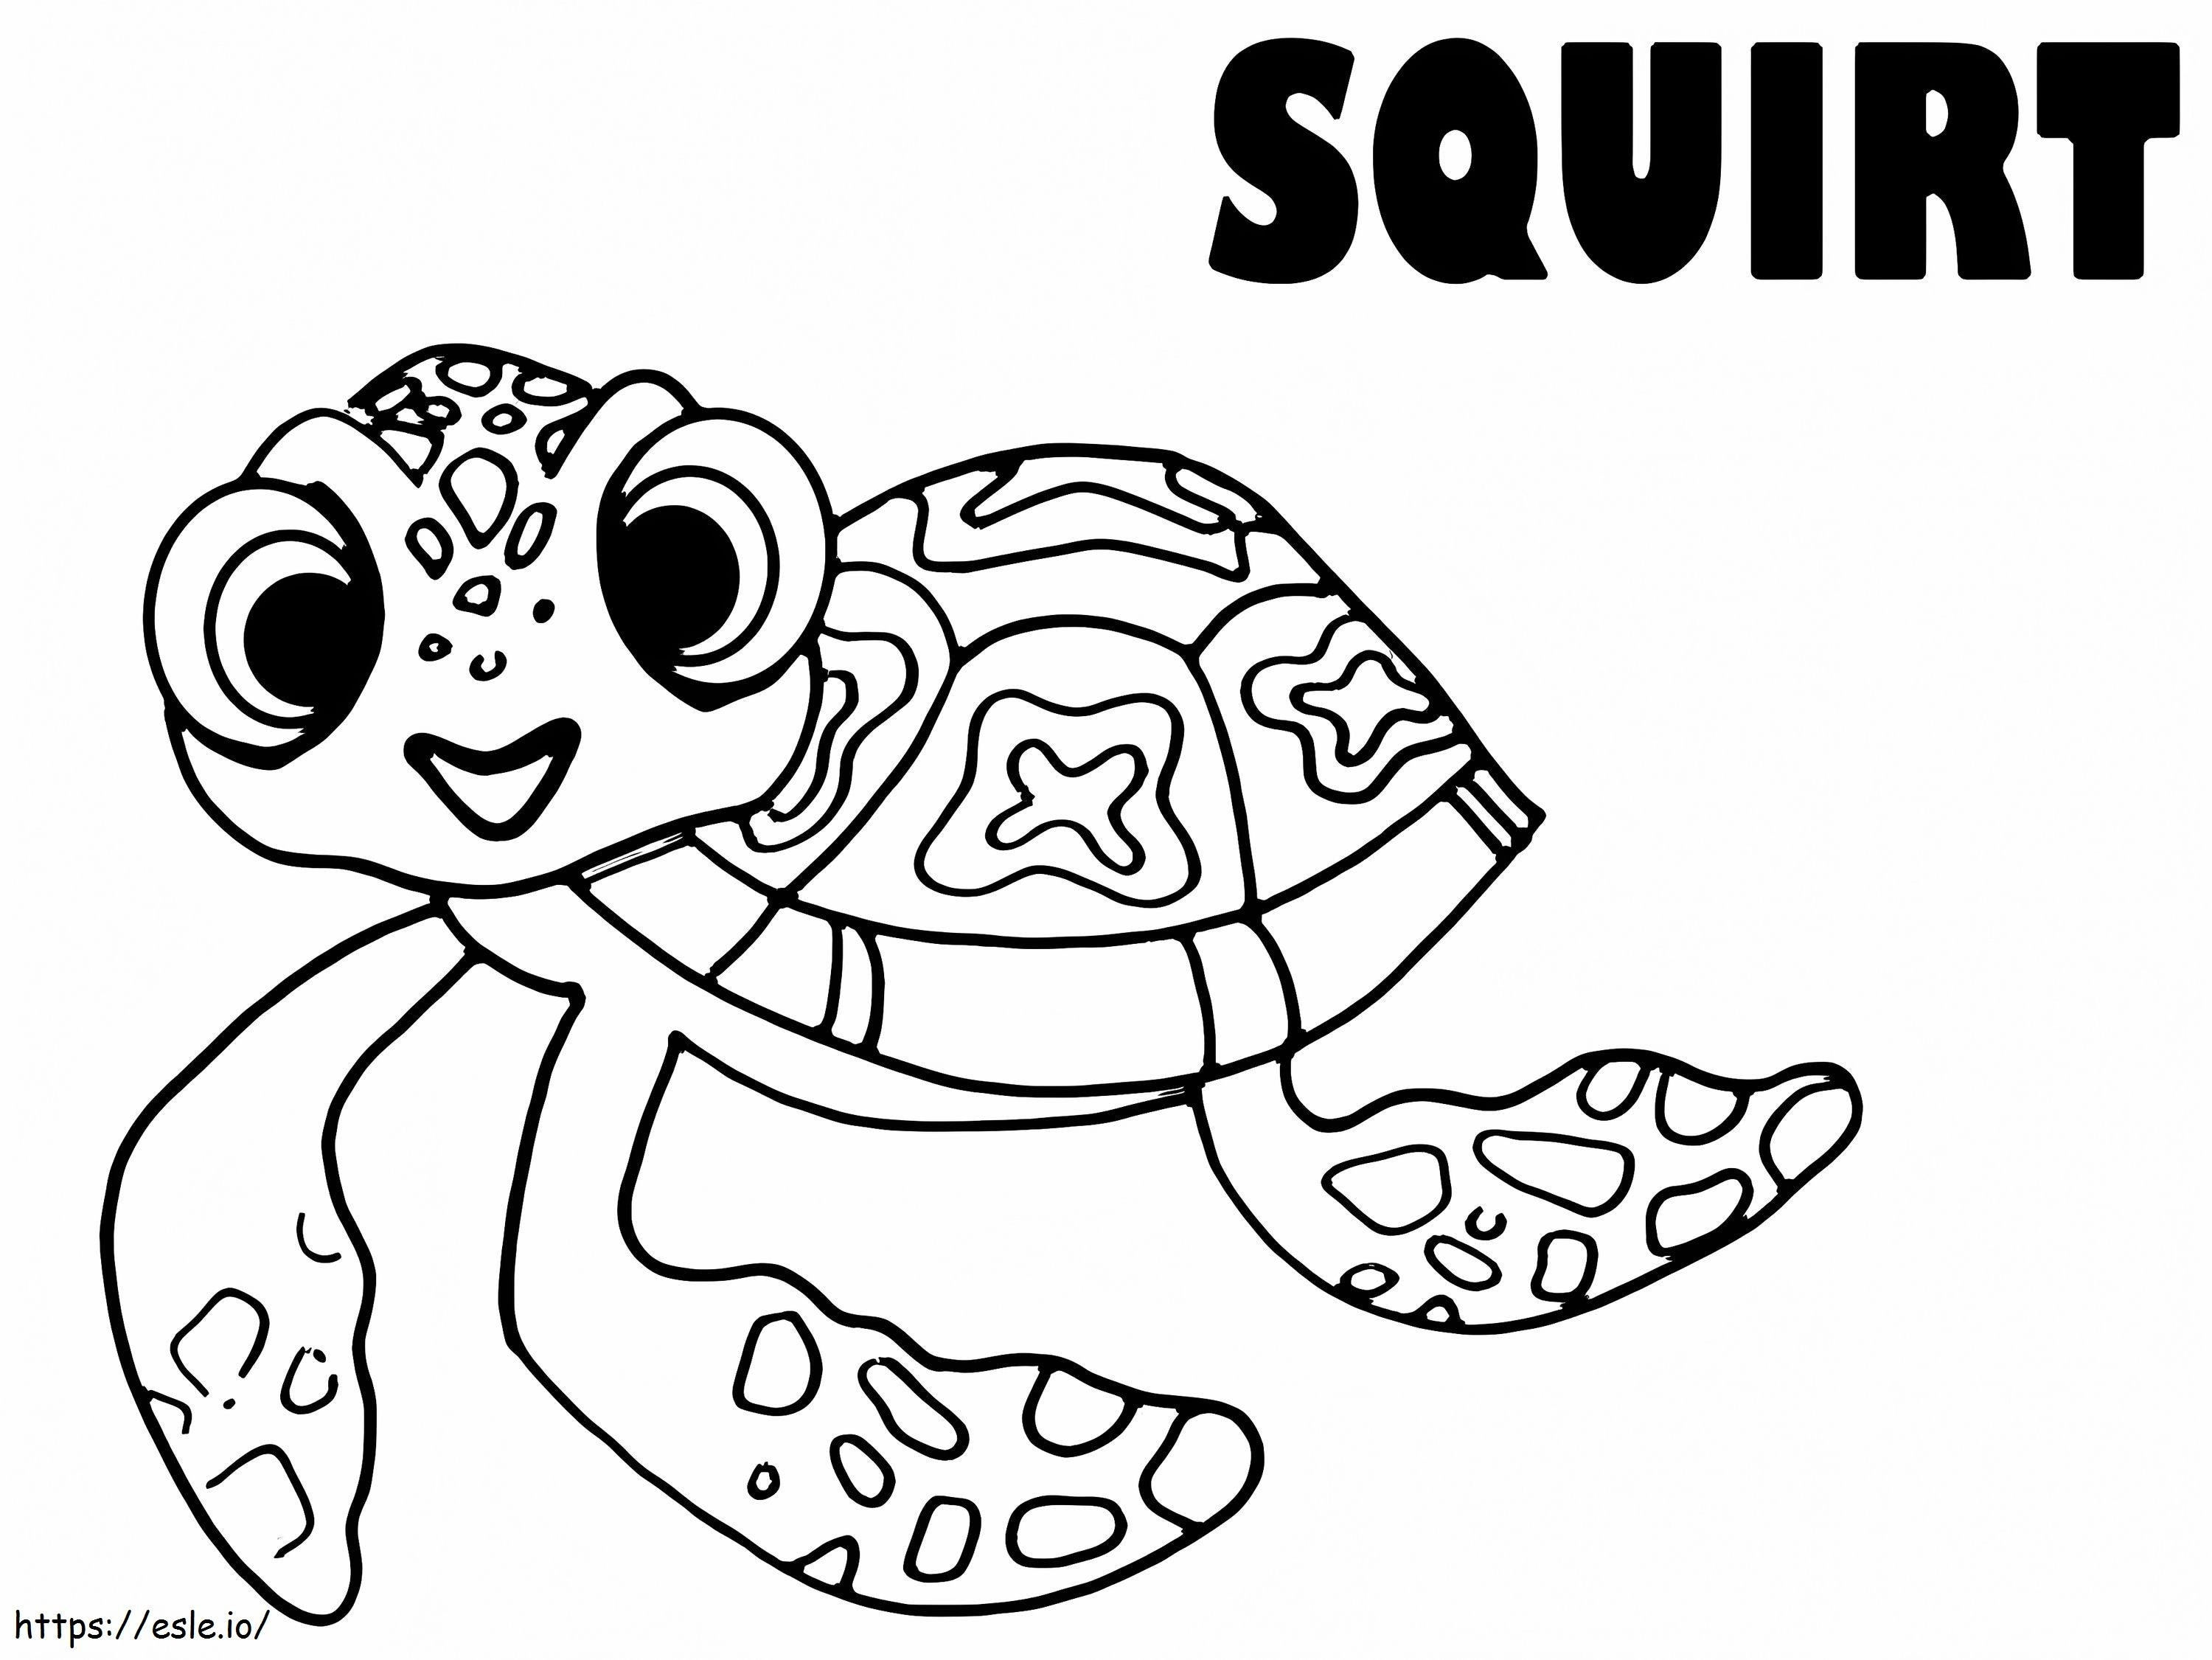 Squirt From Finding Nemo coloring page